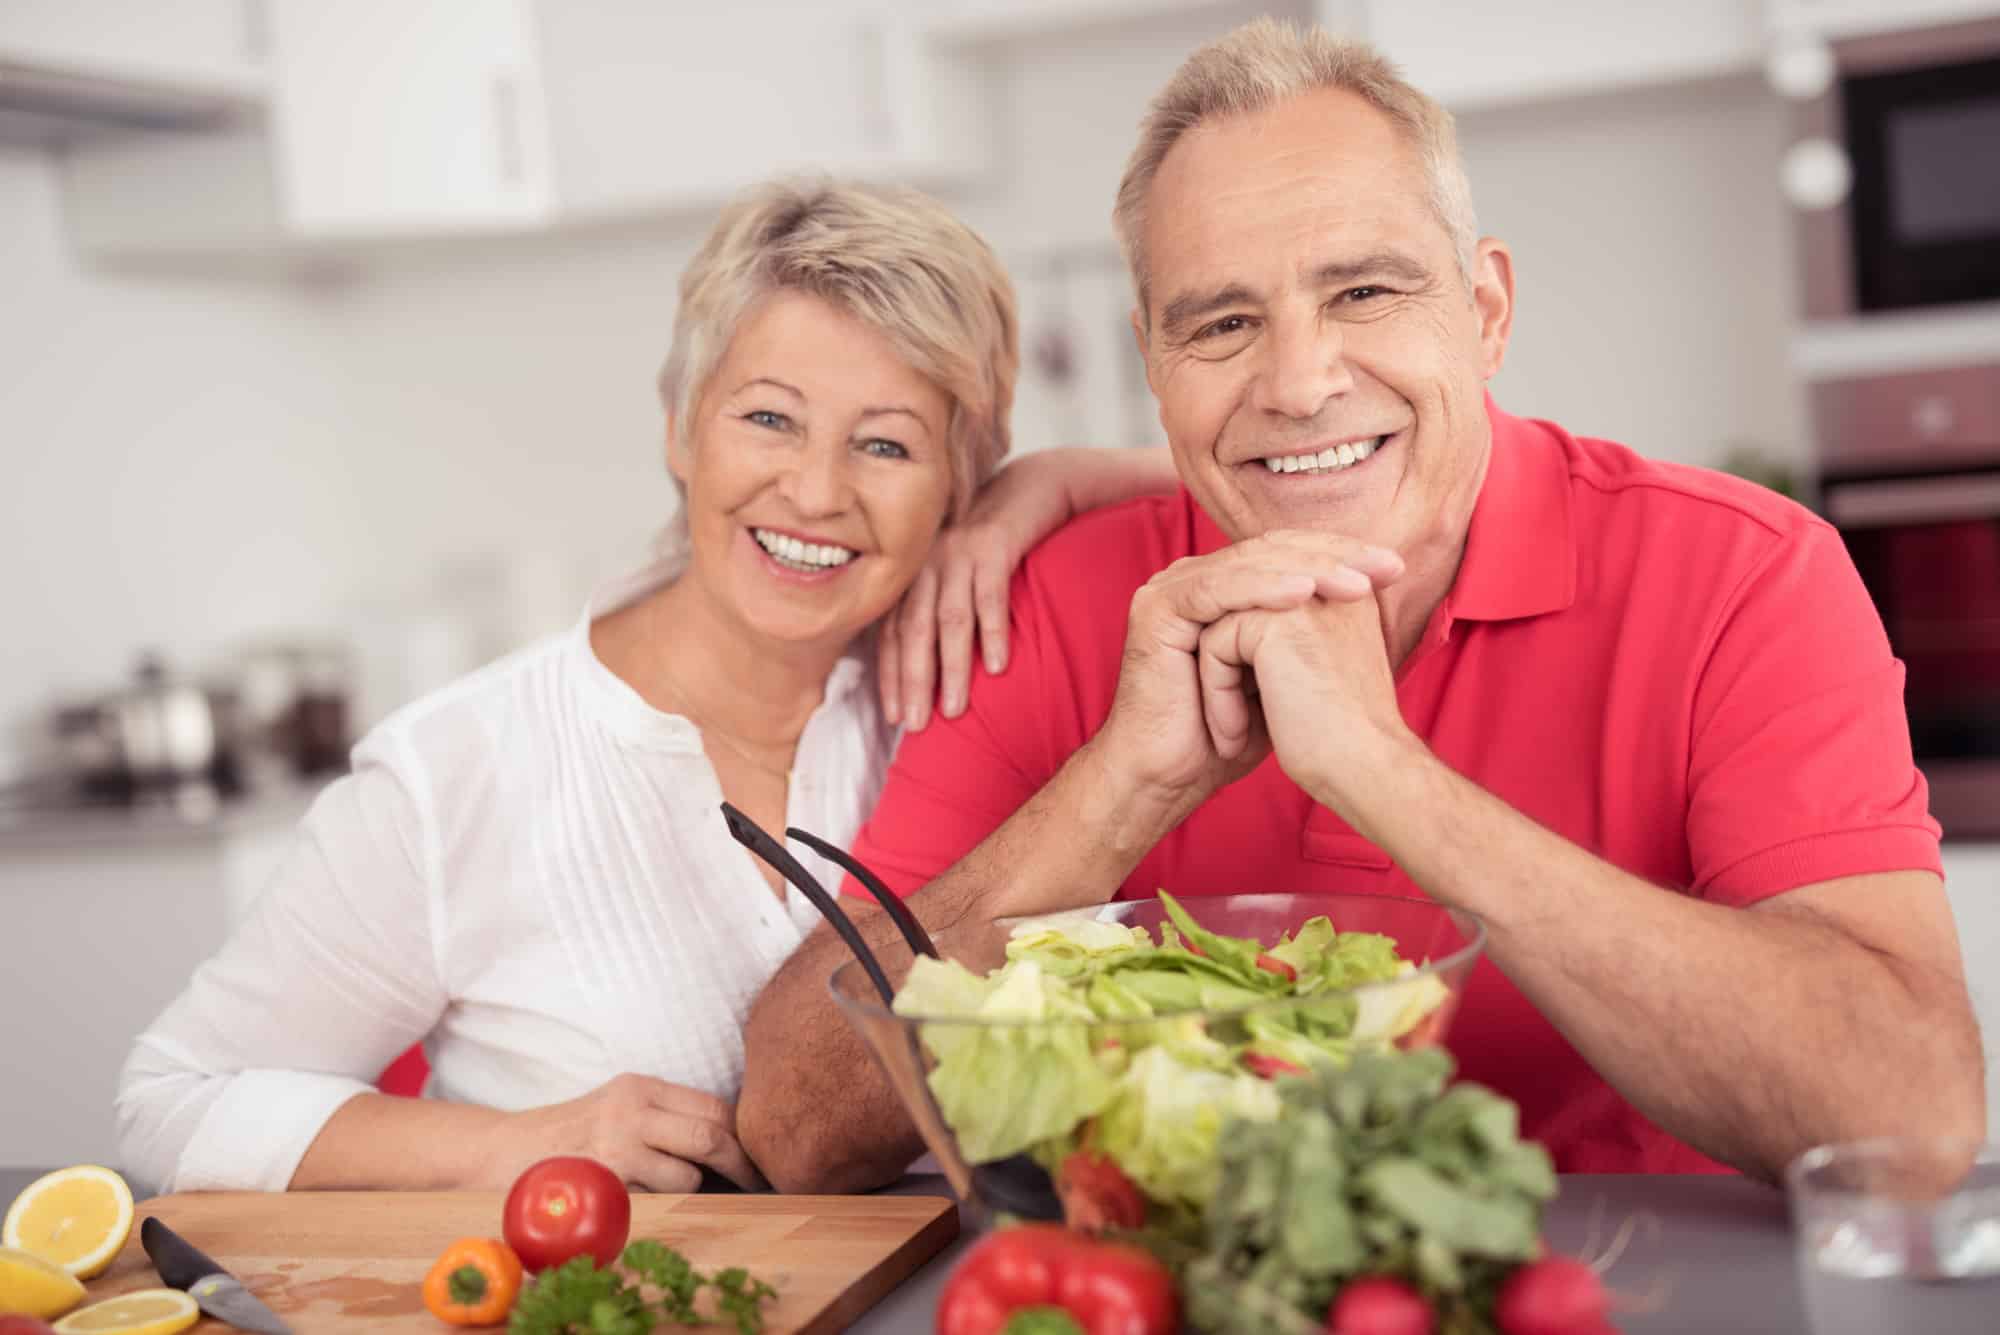 7 Foods to Help Build and Keep Muscles for Seniors